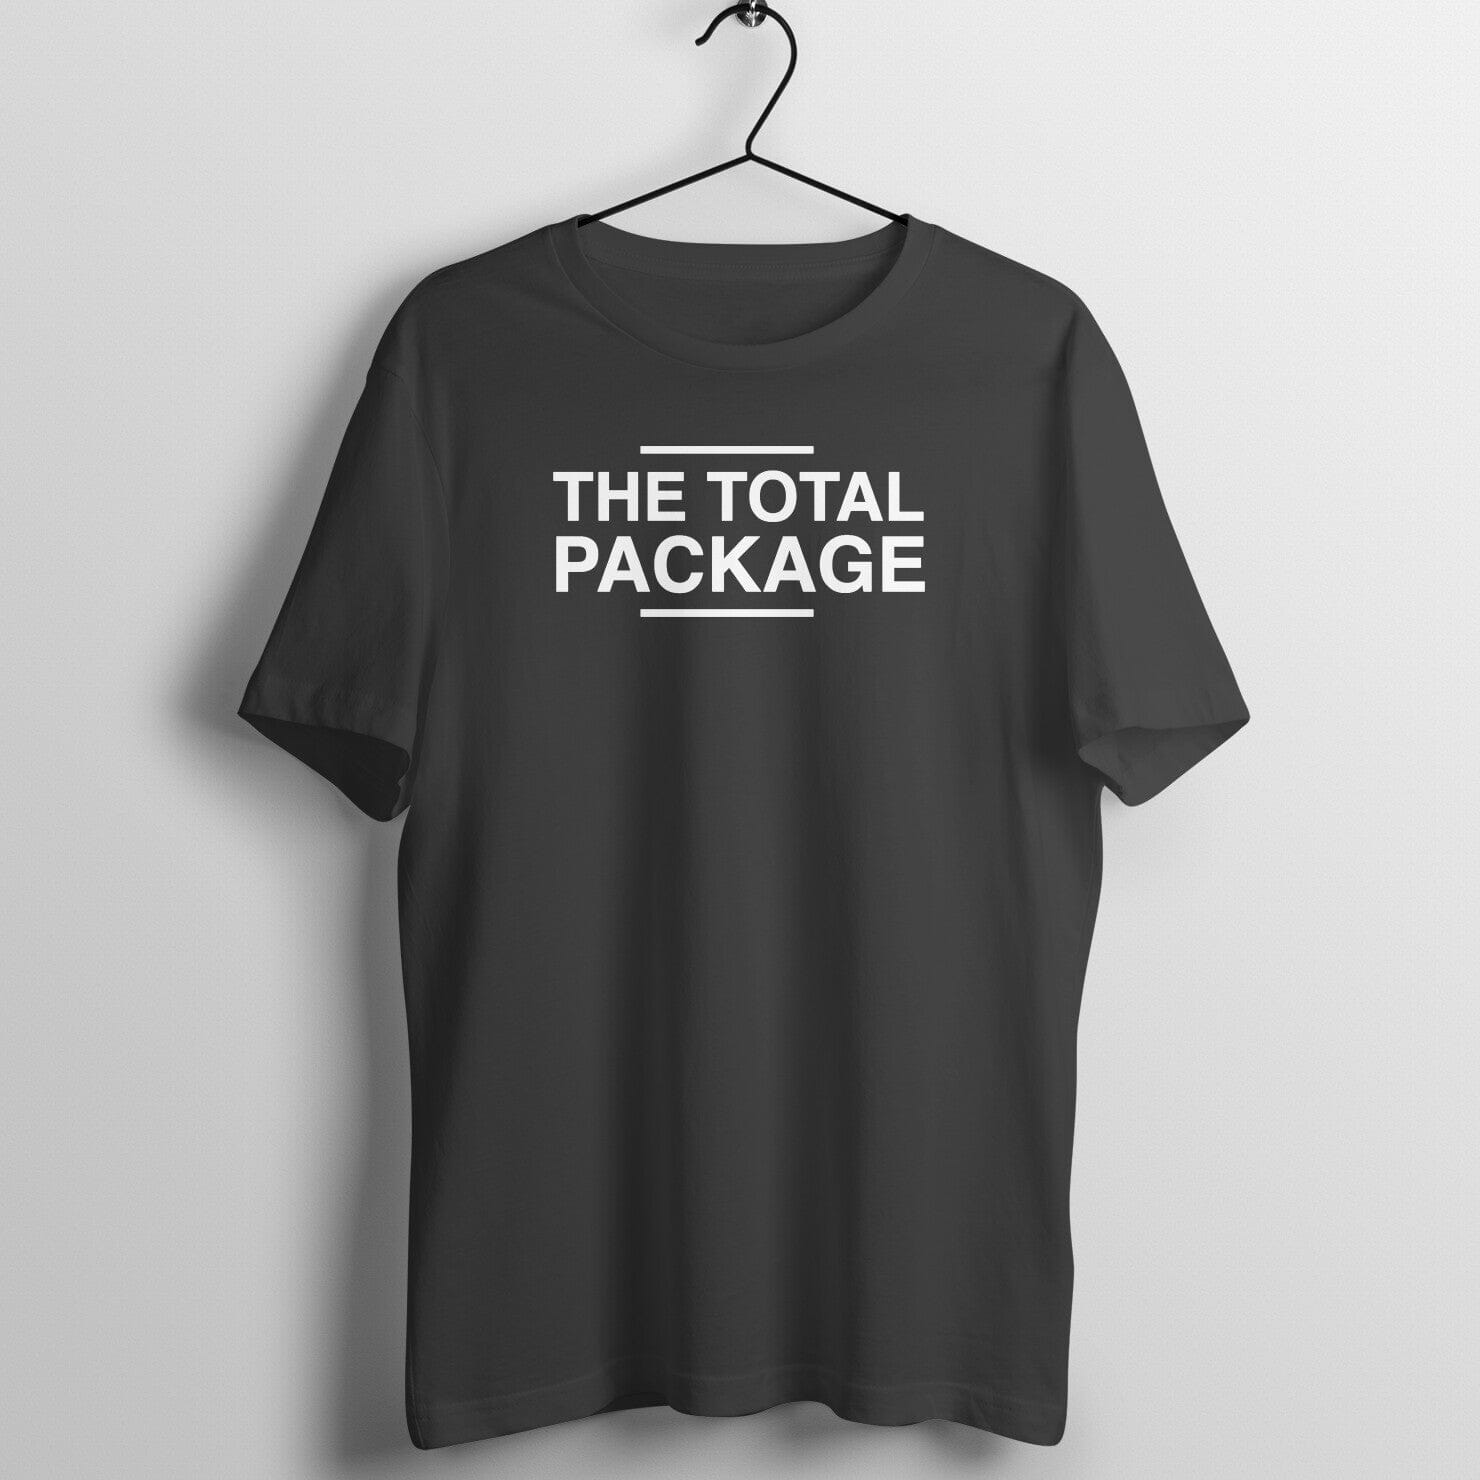 The Total Package Exclusive Black T Shirt for Men and Women Printrove Black S 